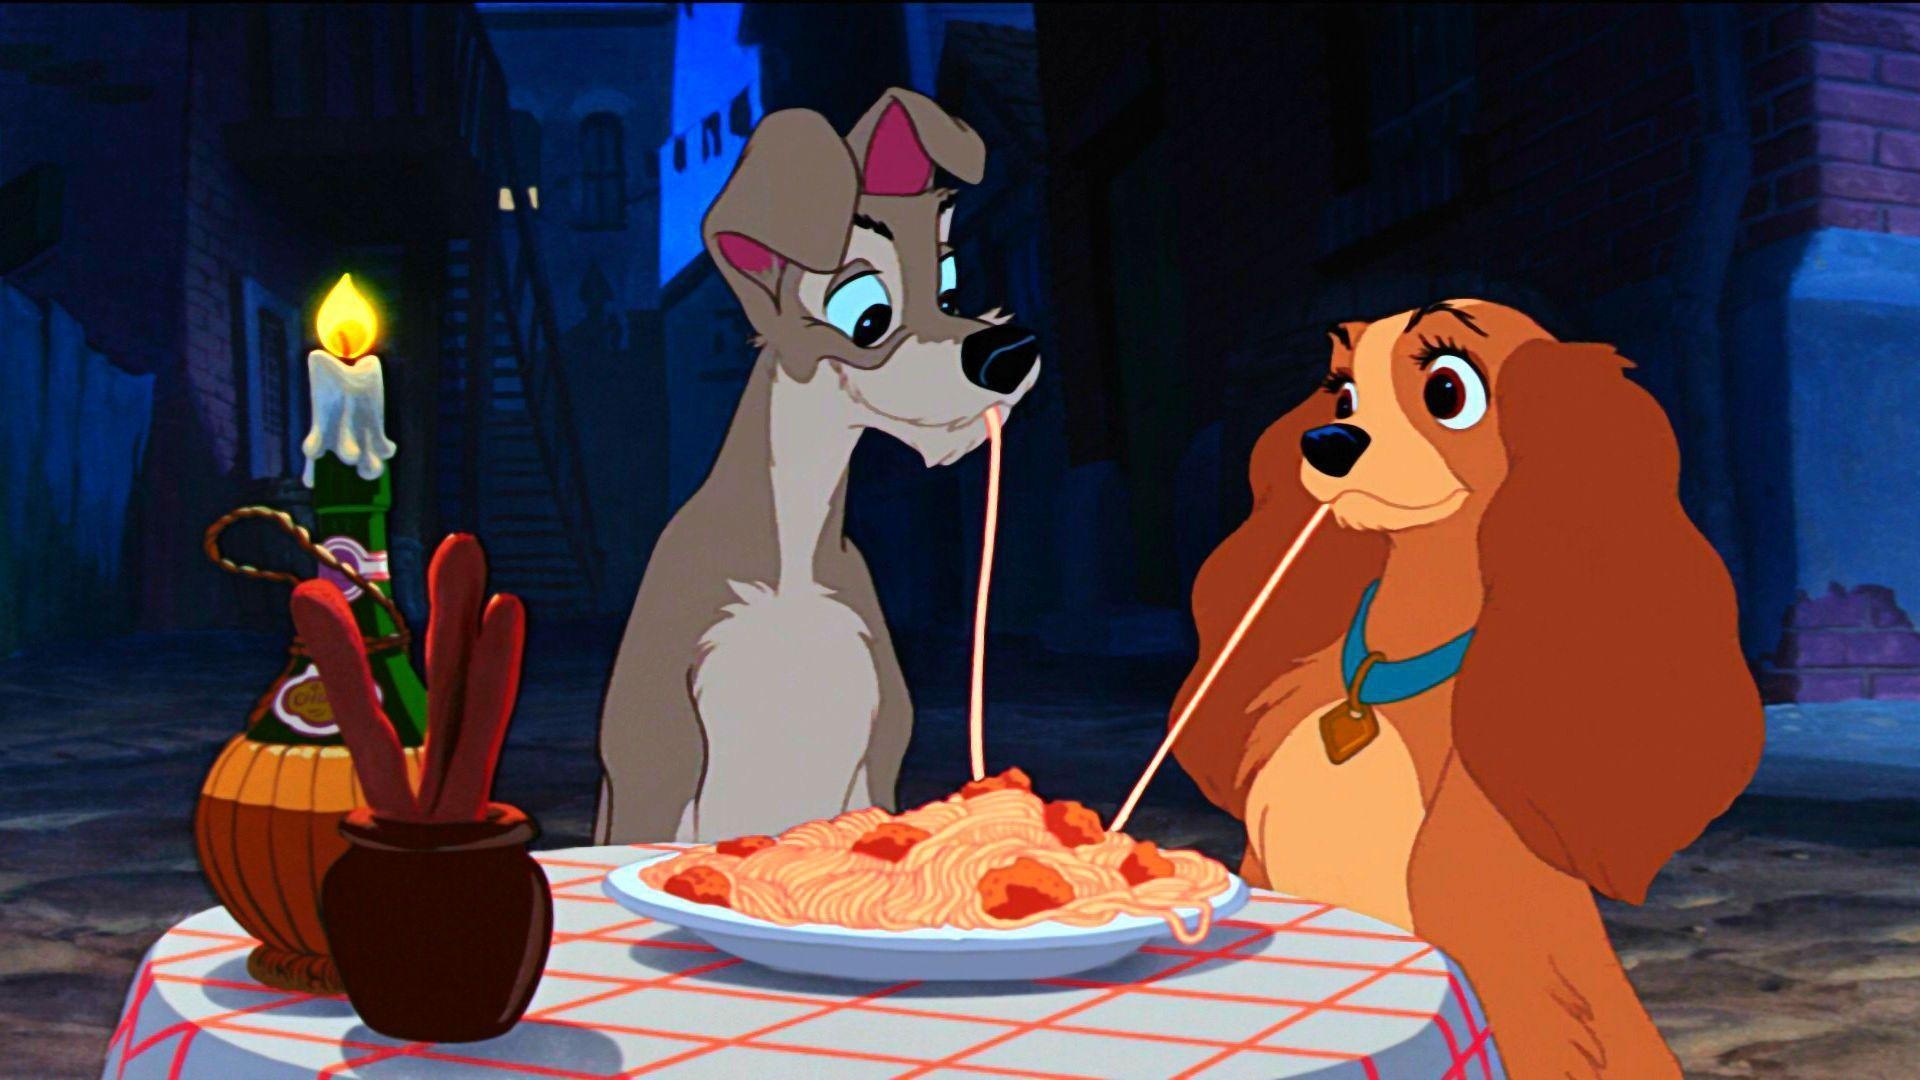 Lady and the Tramp, Animated film, Wallpapers, Backgrounds, 1920x1080 Full HD Desktop